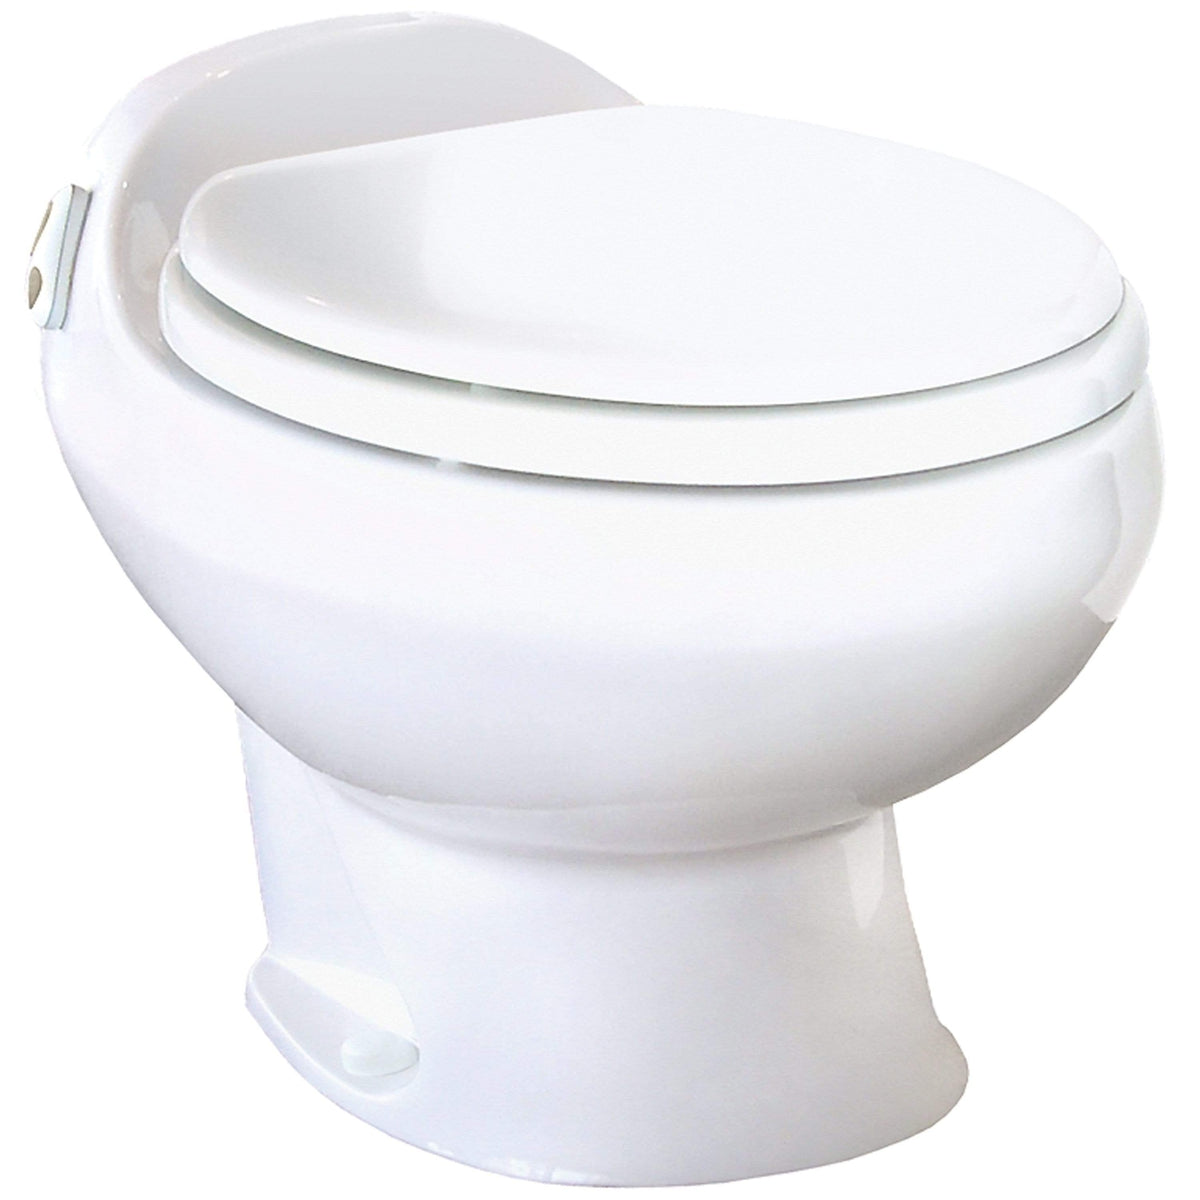 Thetford Not Qualified for Free Shipping Thetford Aria Deluxe II Electric Flush RV Toilet Low White #19771